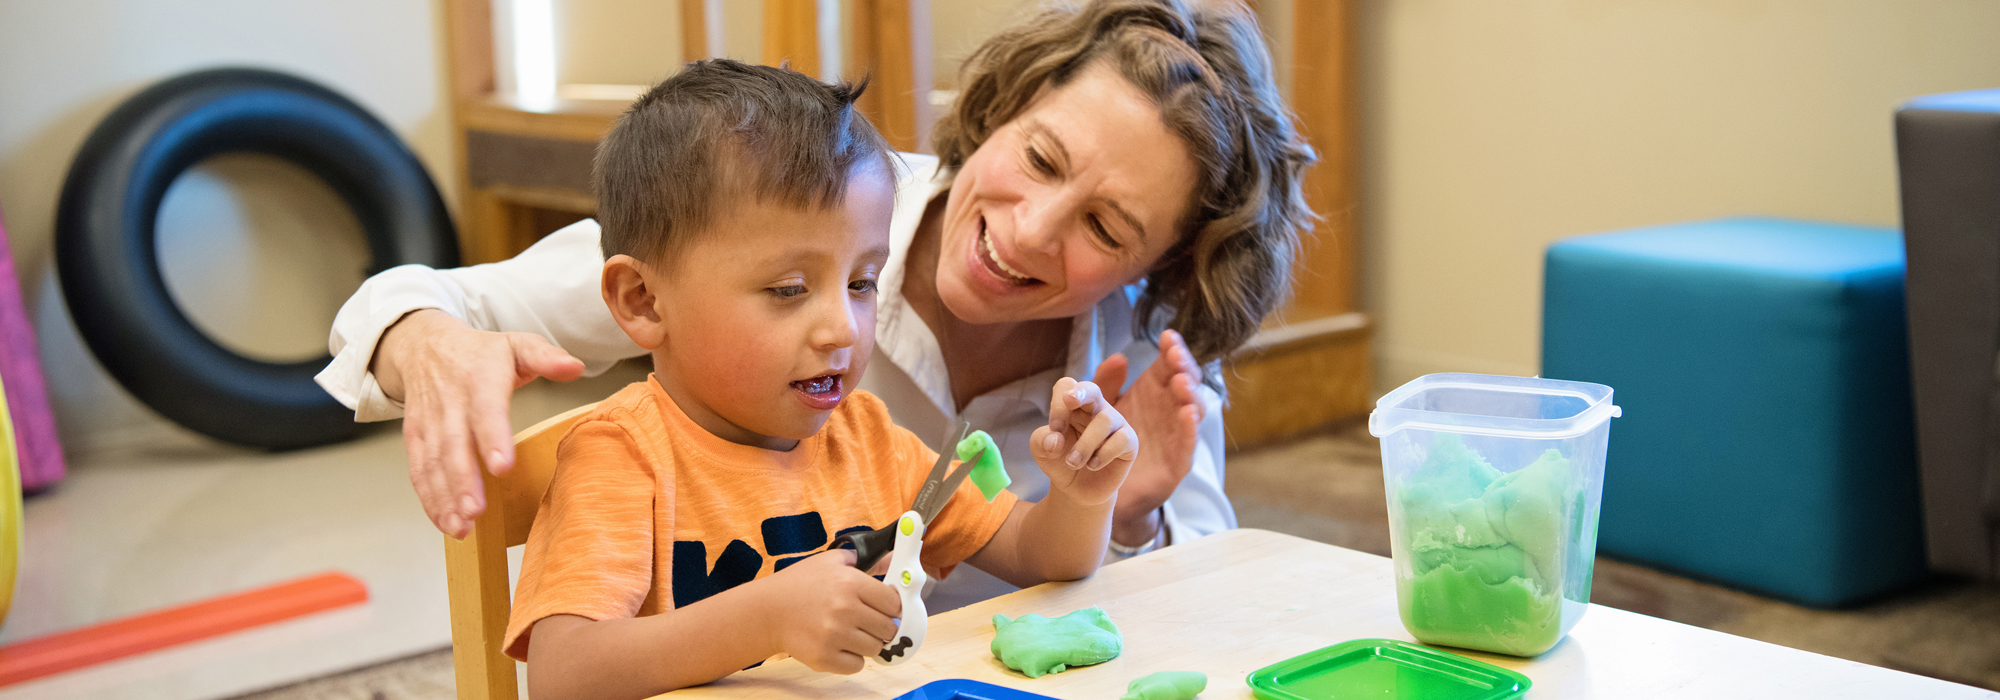 Pediatric occupational therapist Sarah Peery helps a child with fine motor skills.